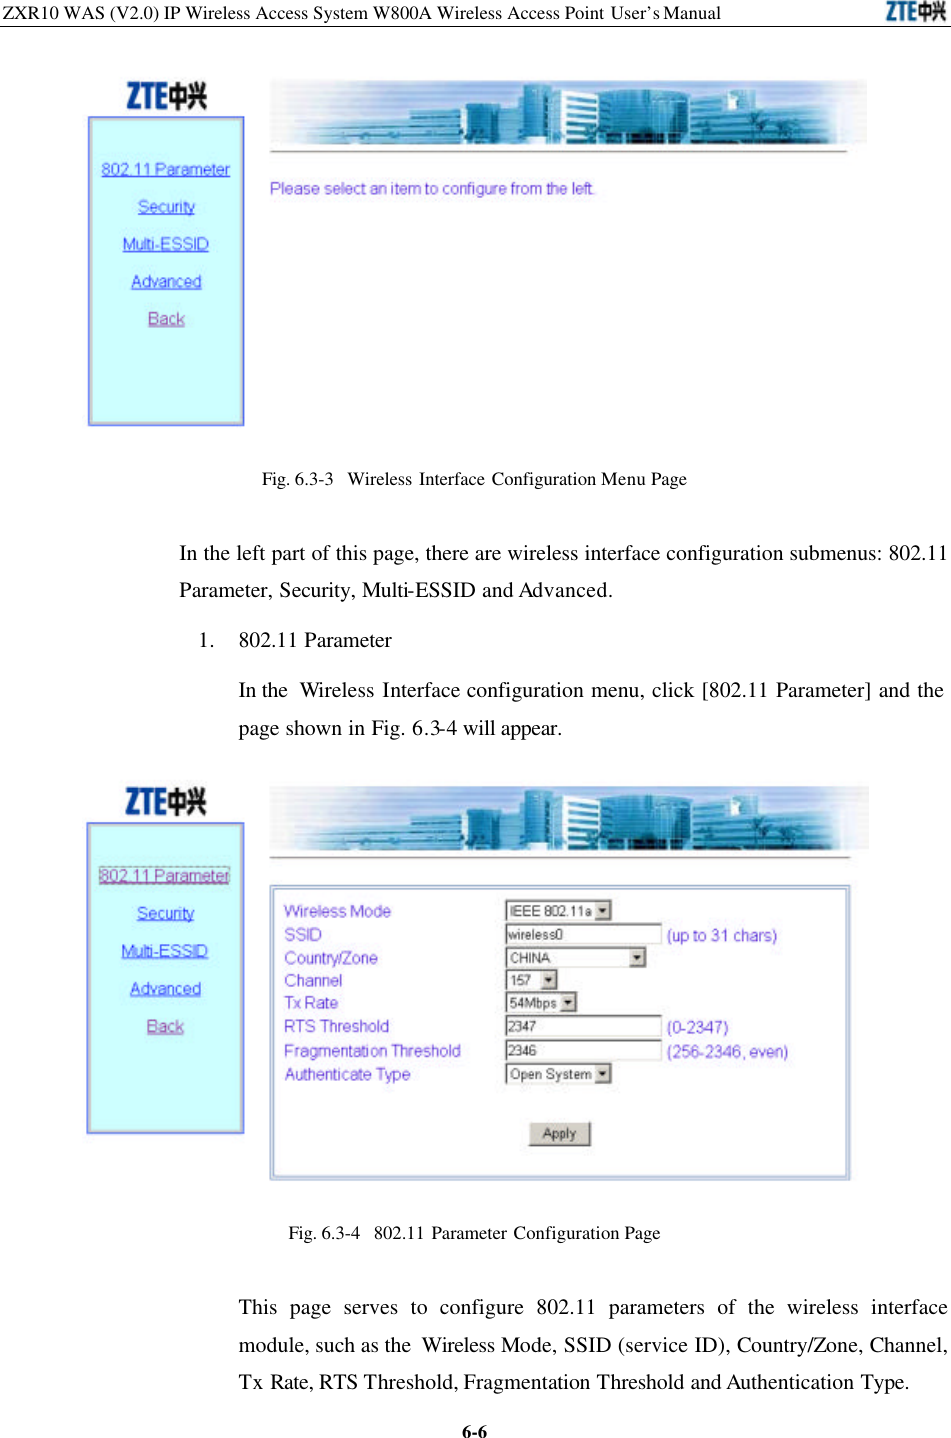 ZXR10 WAS (V2.0) IP Wireless Access System W800A Wireless Access Point User’s Manual  6-6 Fig. 6.3-3  Wireless Interface Configuration Menu Page In the left part of this page, there are wireless interface configuration submenus: 802.11 Parameter, Security, Multi-ESSID and Advanced.   1. 802.11 Parameter In the  Wireless Interface configuration menu, click [802.11 Parameter] and the page shown in Fig. 6.3-4 will appear.  Fig. 6.3-4  802.11 Parameter Configuration Page   This page serves to configure 802.11 parameters of the wireless interface module, such as the  Wireless Mode, SSID (service ID), Country/Zone, Channel, Tx Rate, RTS Threshold, Fragmentation Threshold and Authentication Type.   